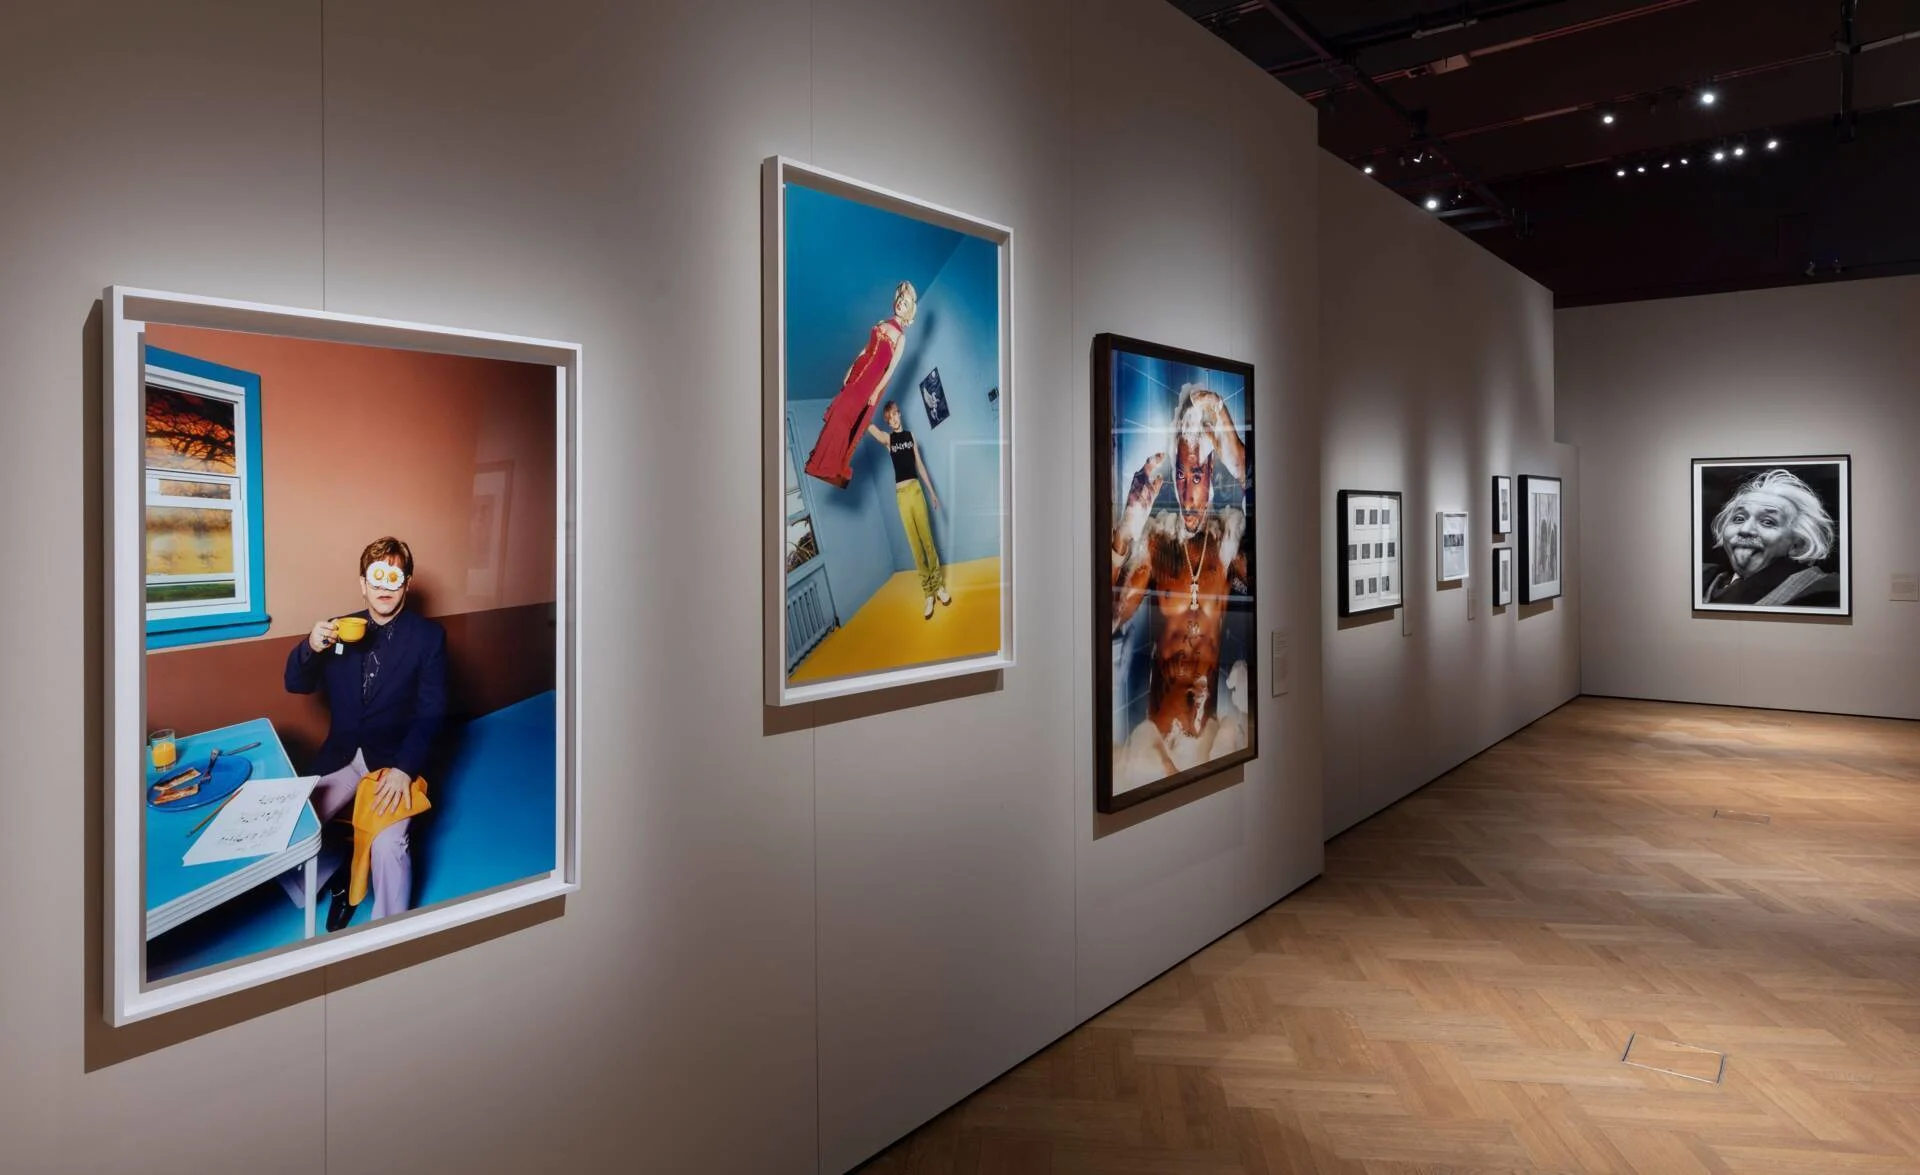 A range of large framed photographs in a spacious art gallery.